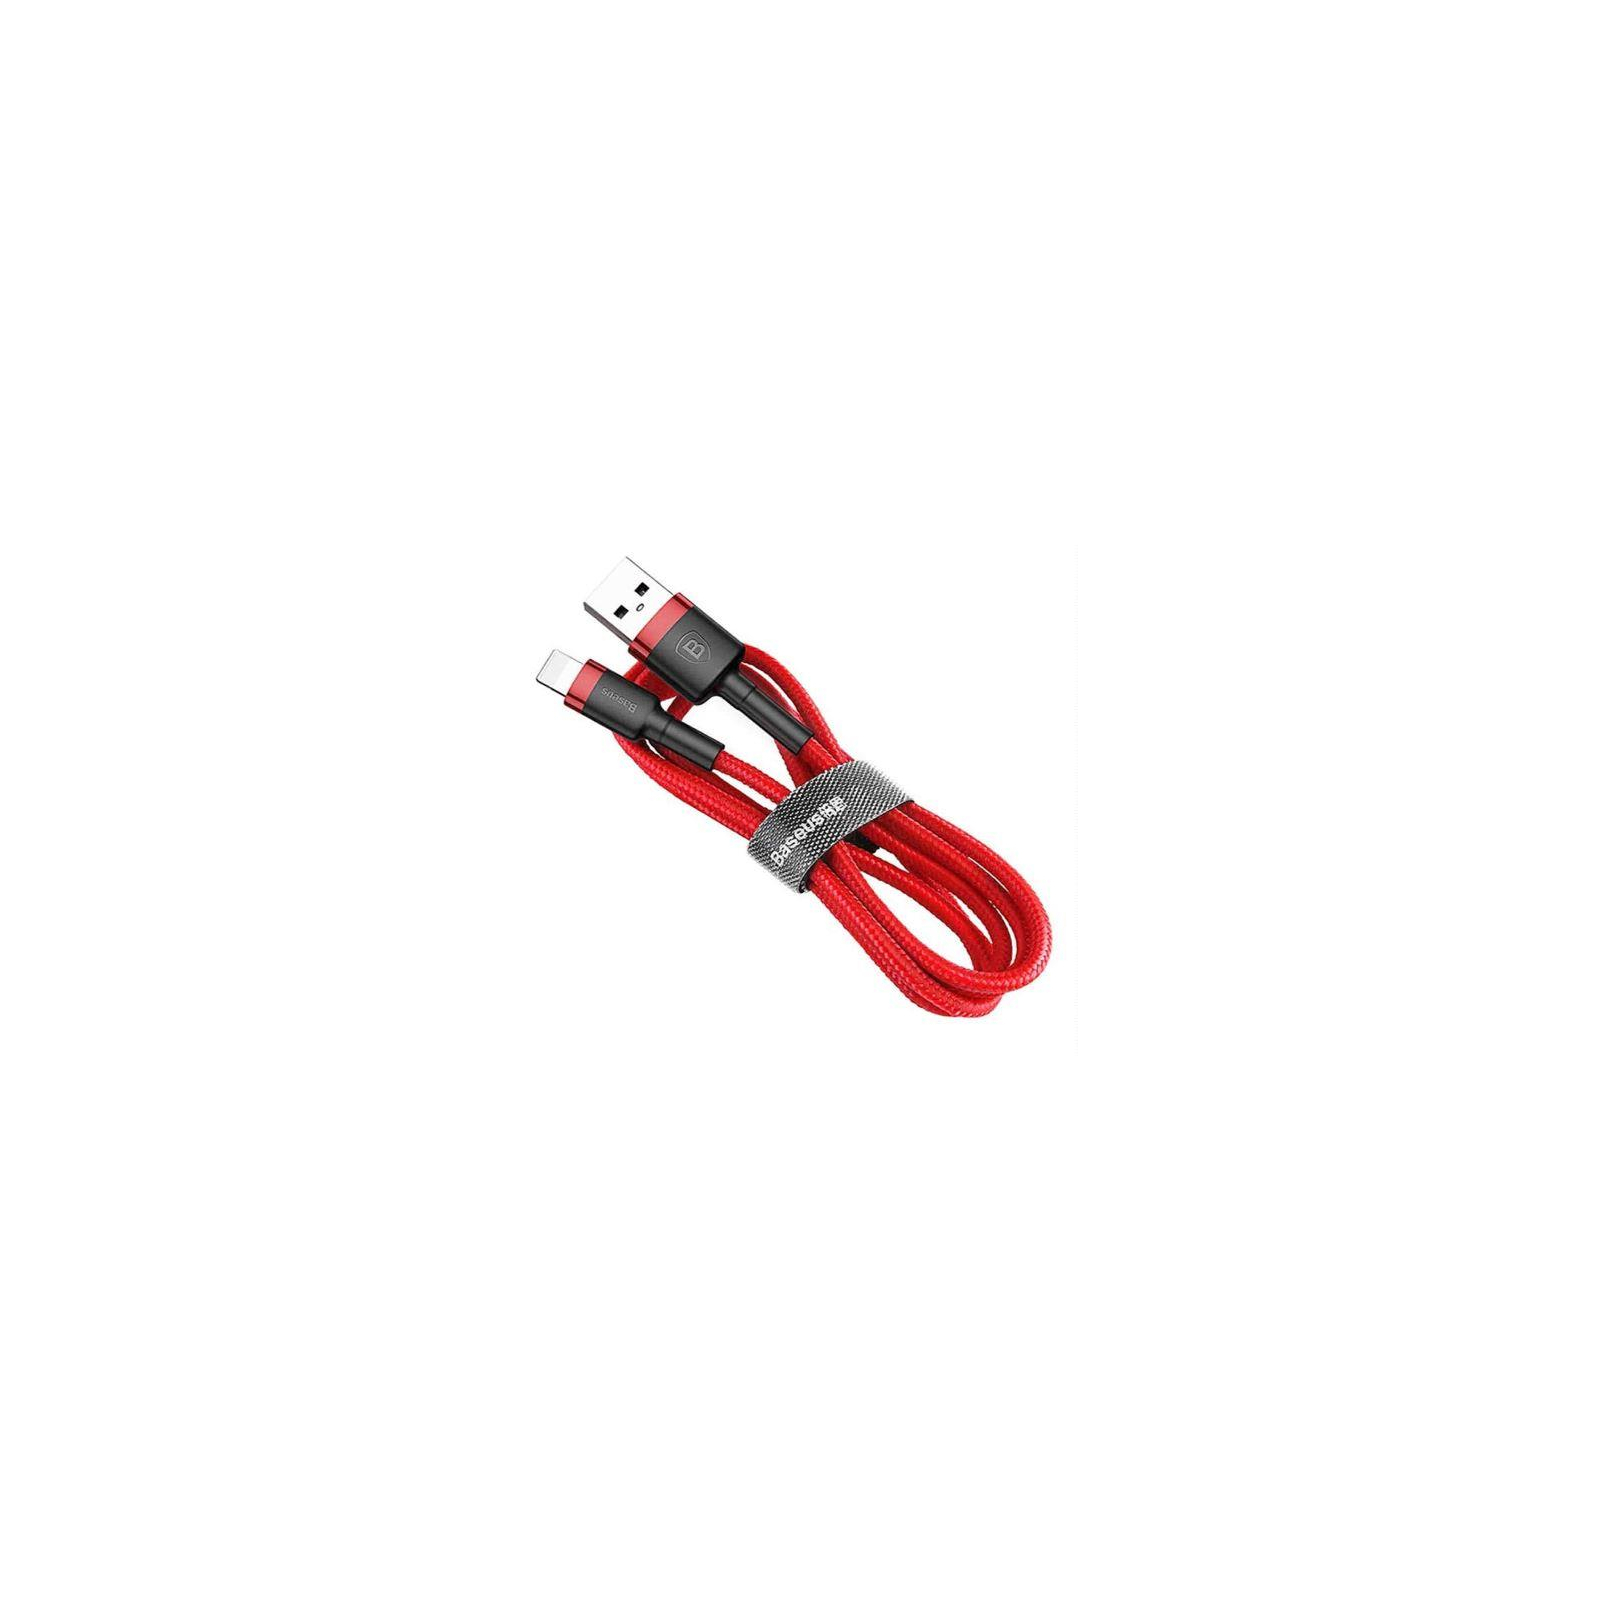 Дата кабель USB 2.0 AM to Type-C 1.0m Cafule 3A red+red Baseus (CATKLF-B09)